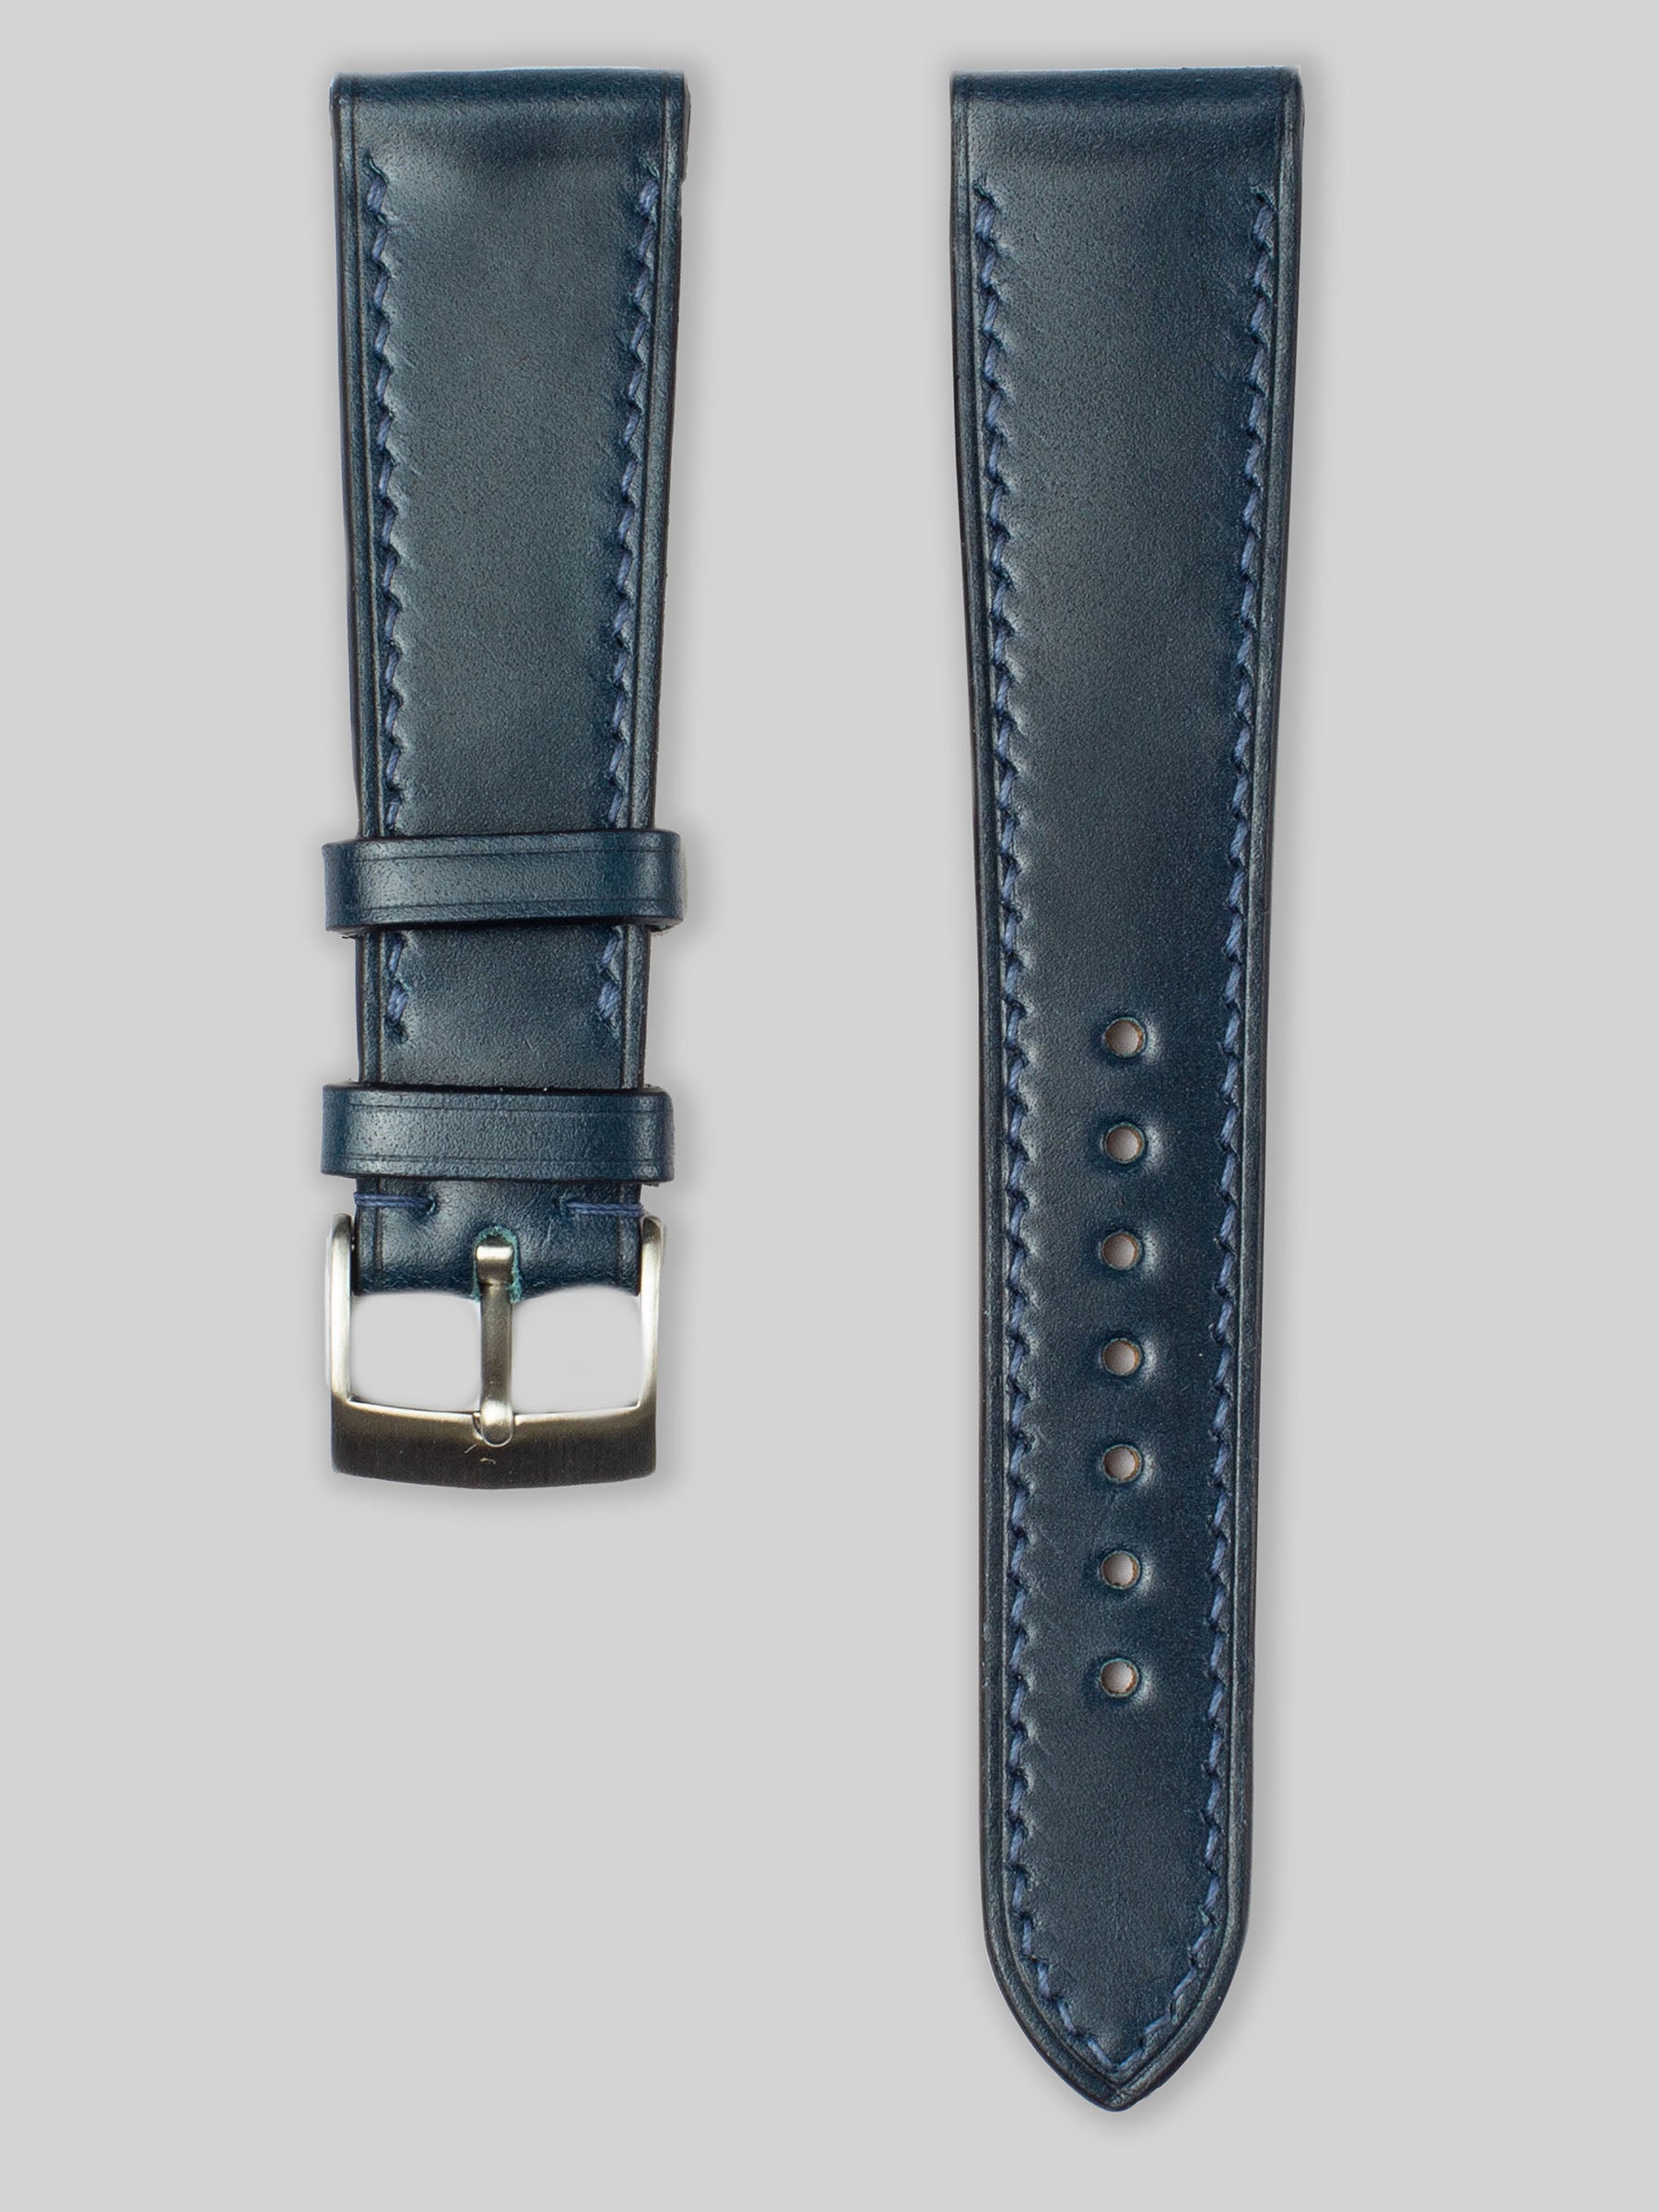 Shell Cordovan Leather Watch Strap - Navy Blue